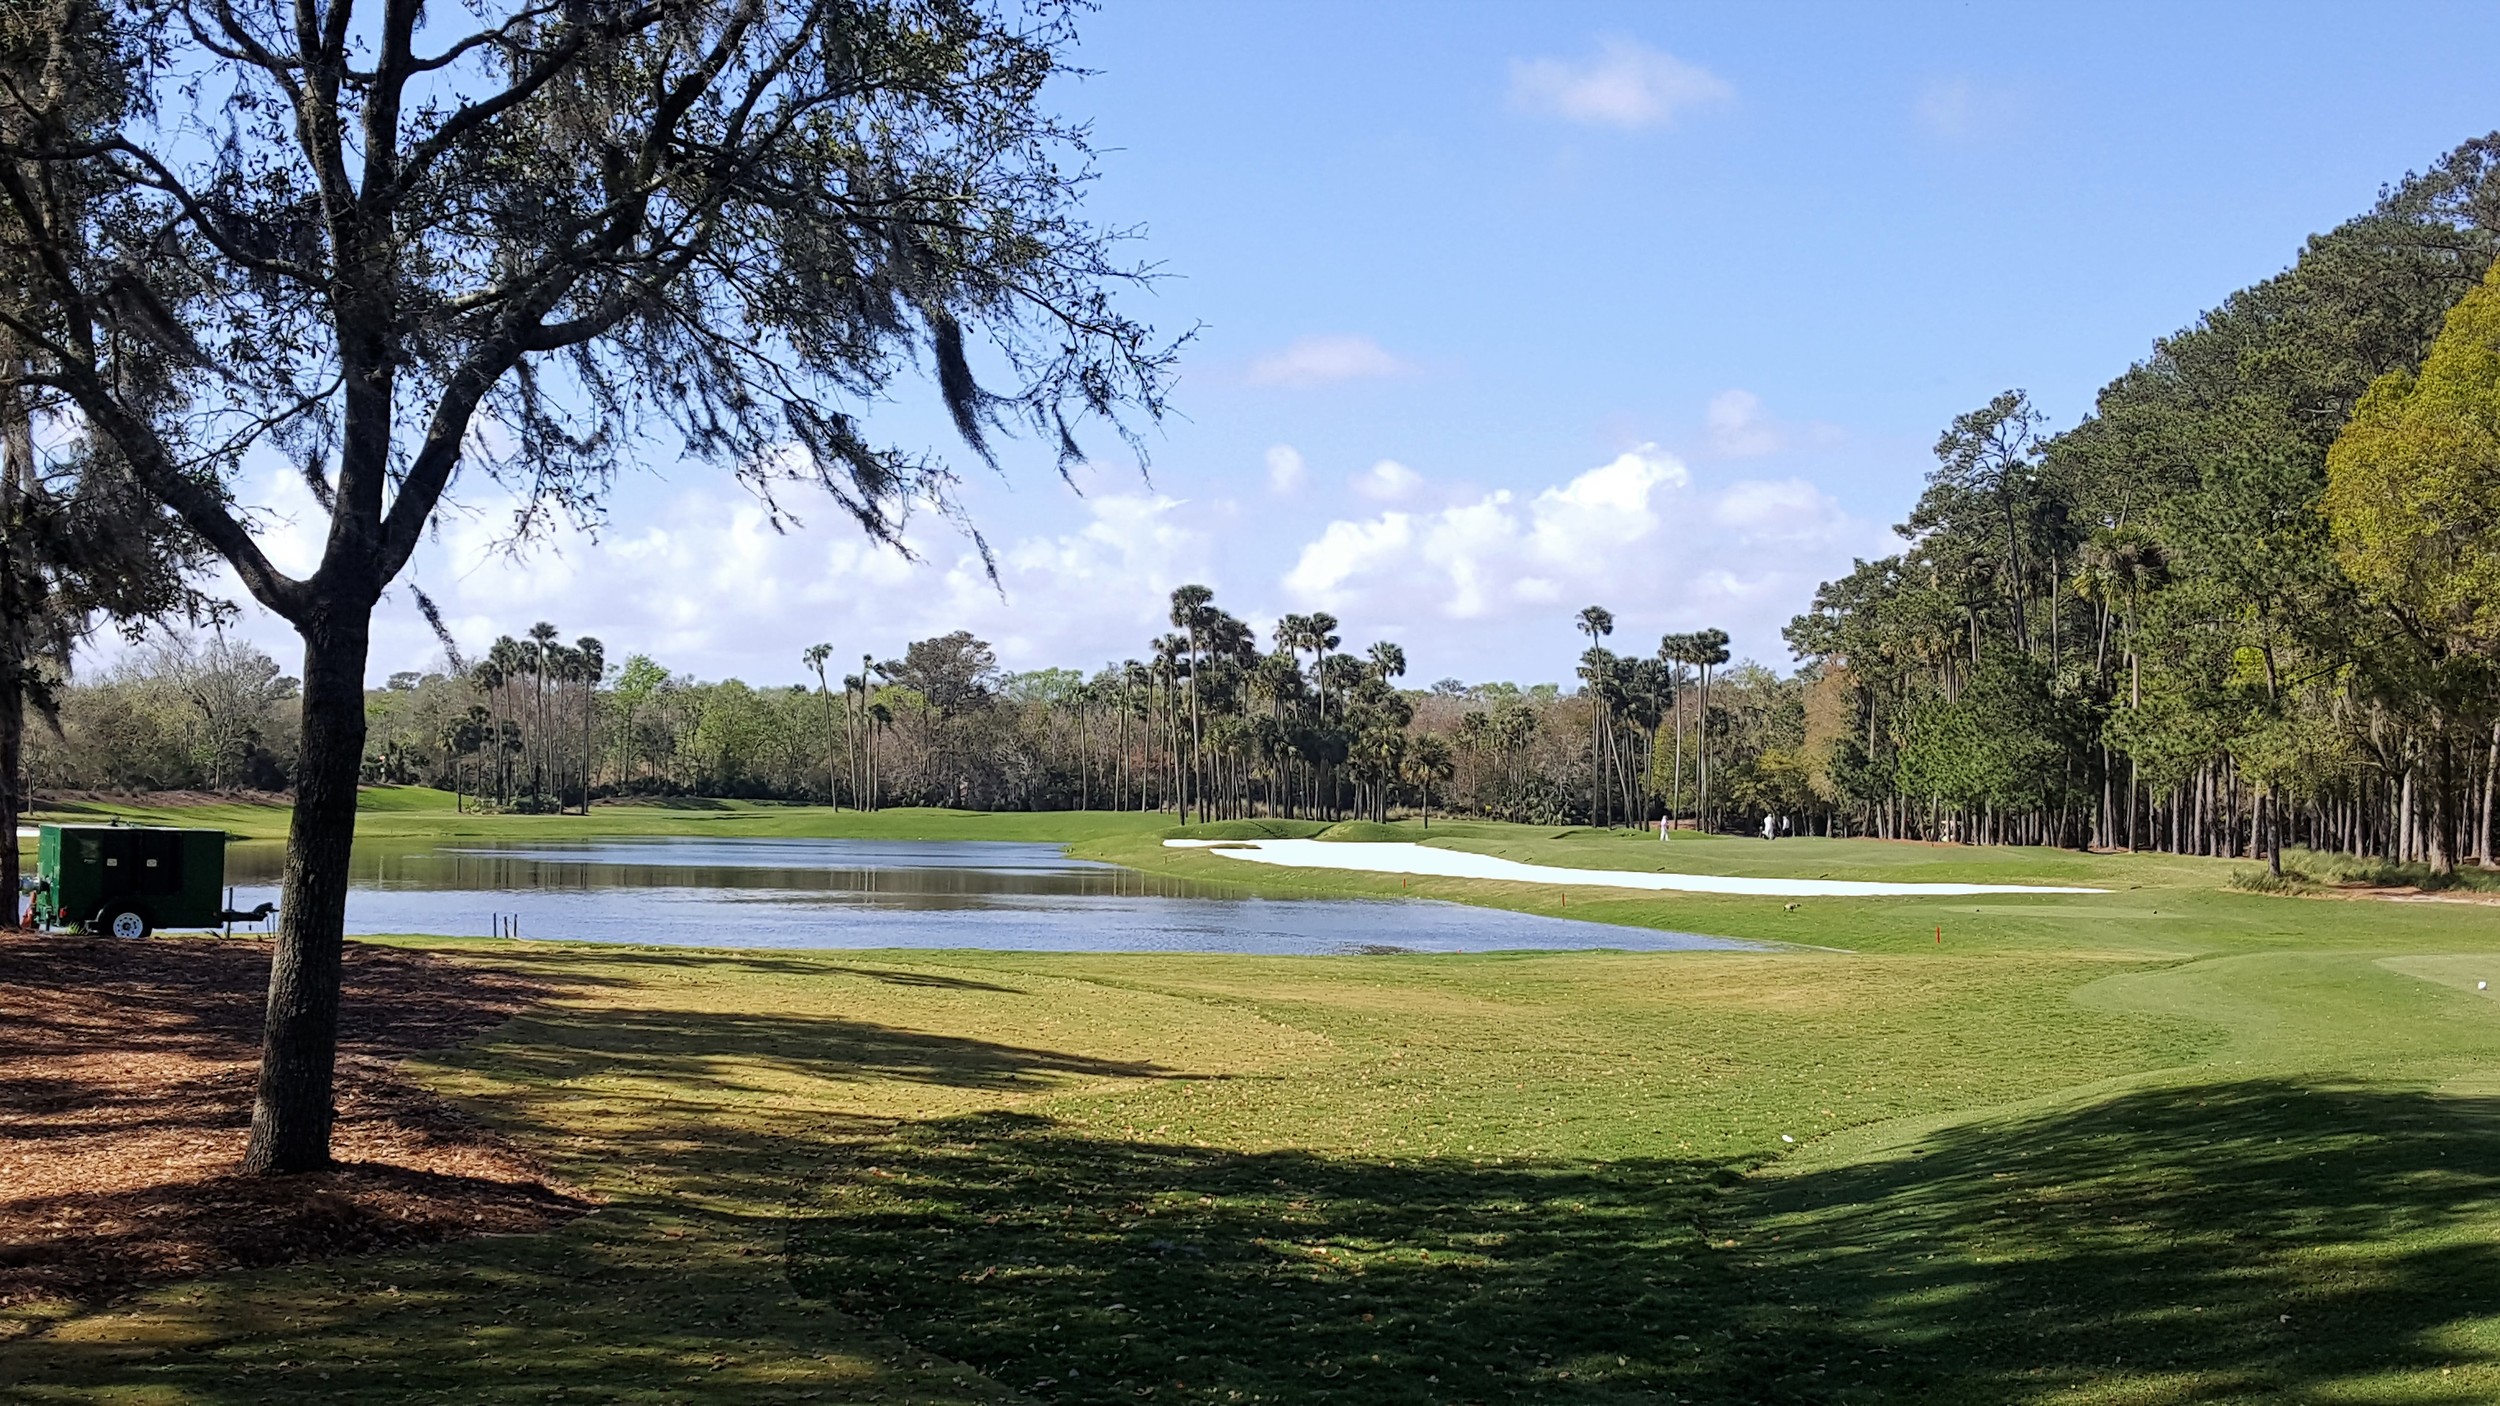 The renovated Stadium Course includes a new lake at the 6th hole